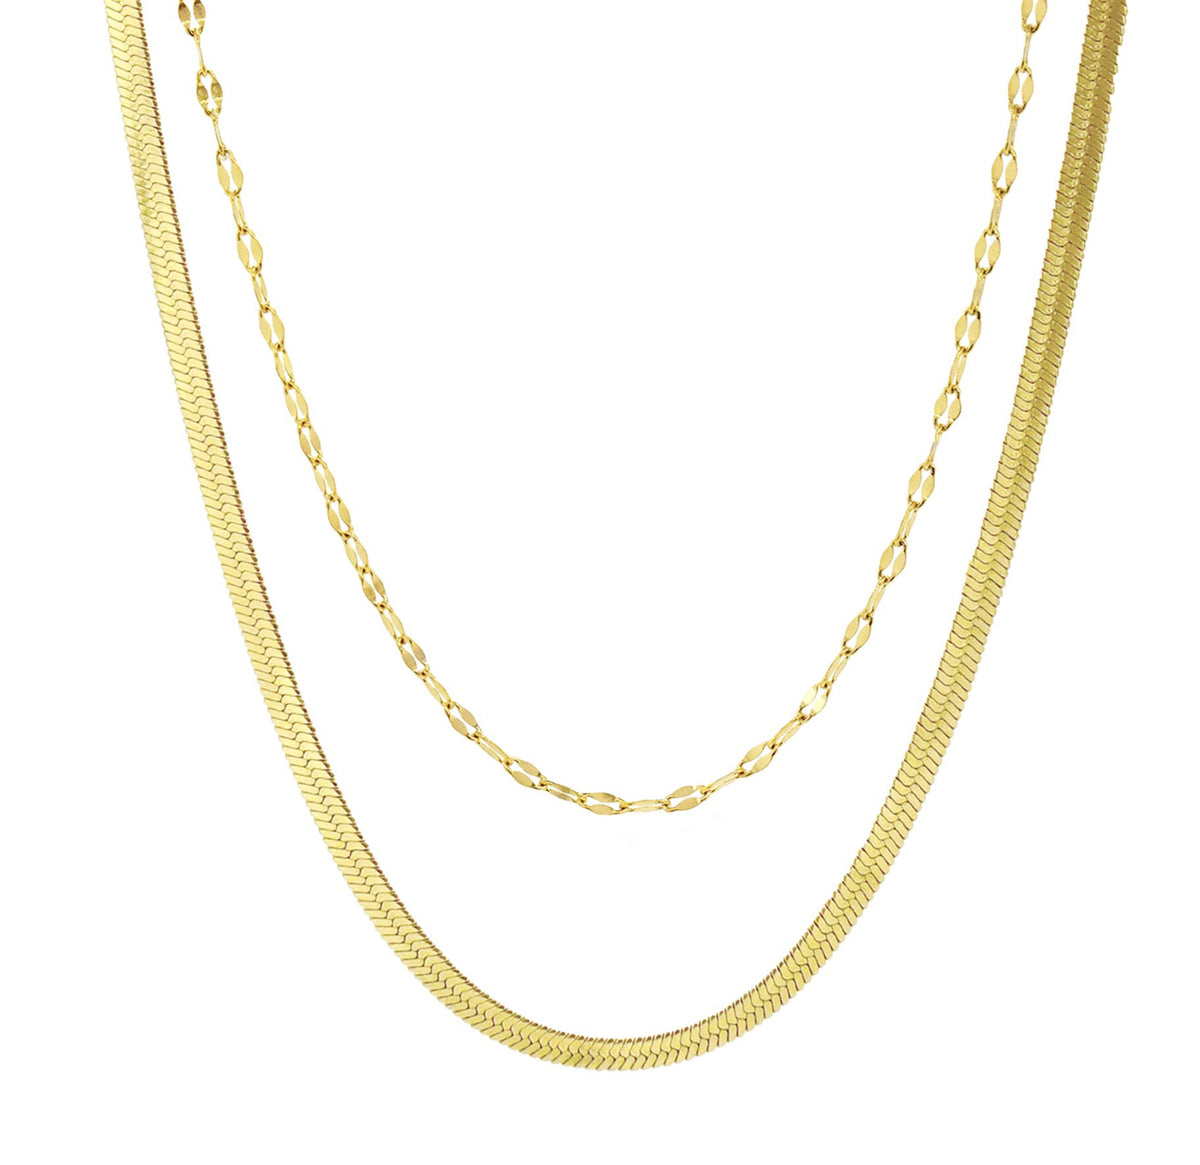 dainty gold chain necklace stack waterproof